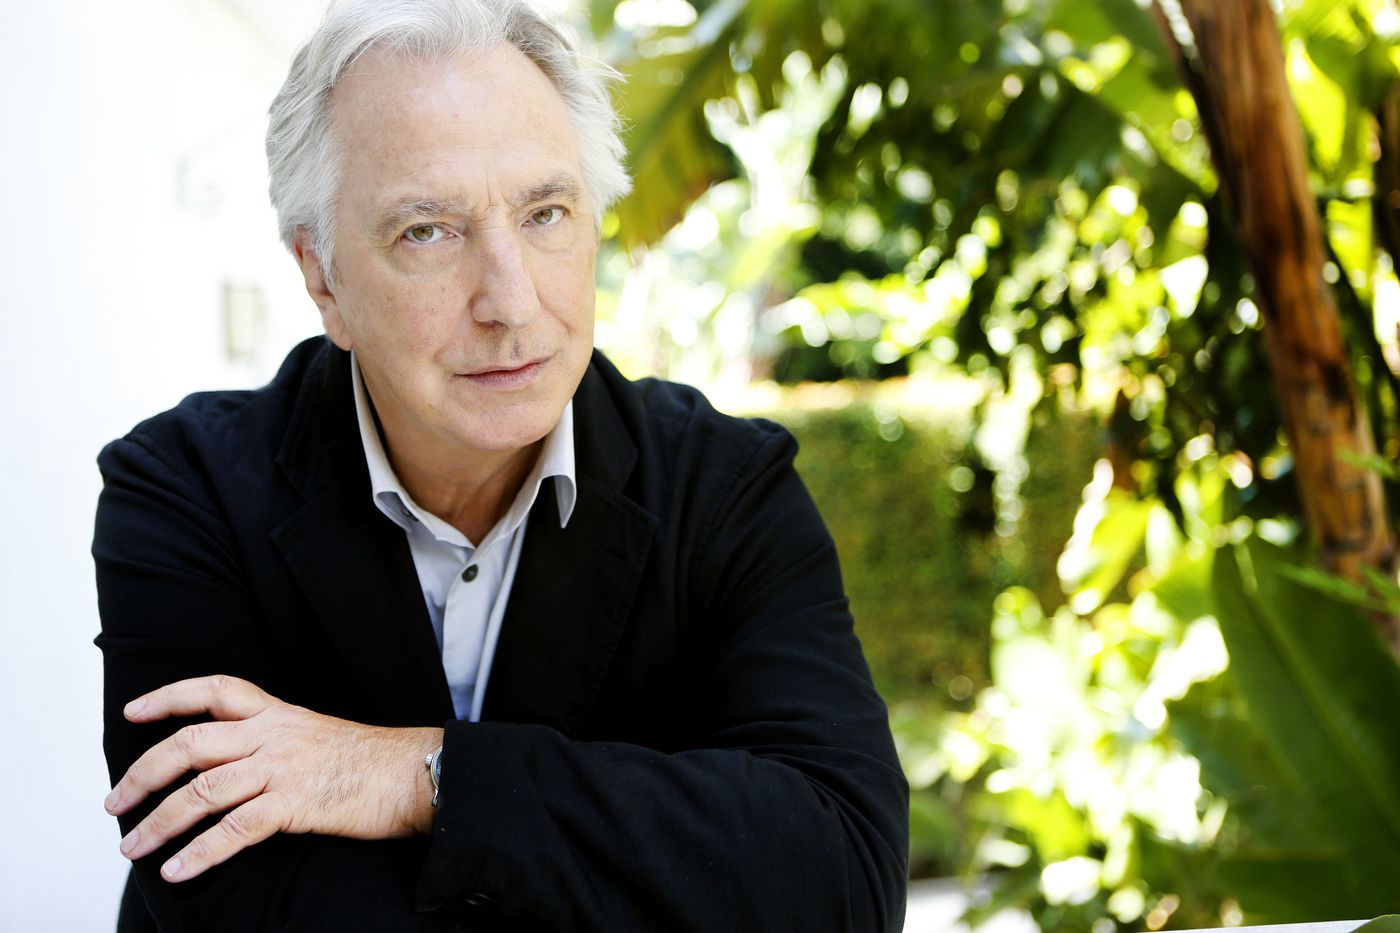 Alan Rickman's letters reveal 'frustration' with playing Snape in Harry Potter movies